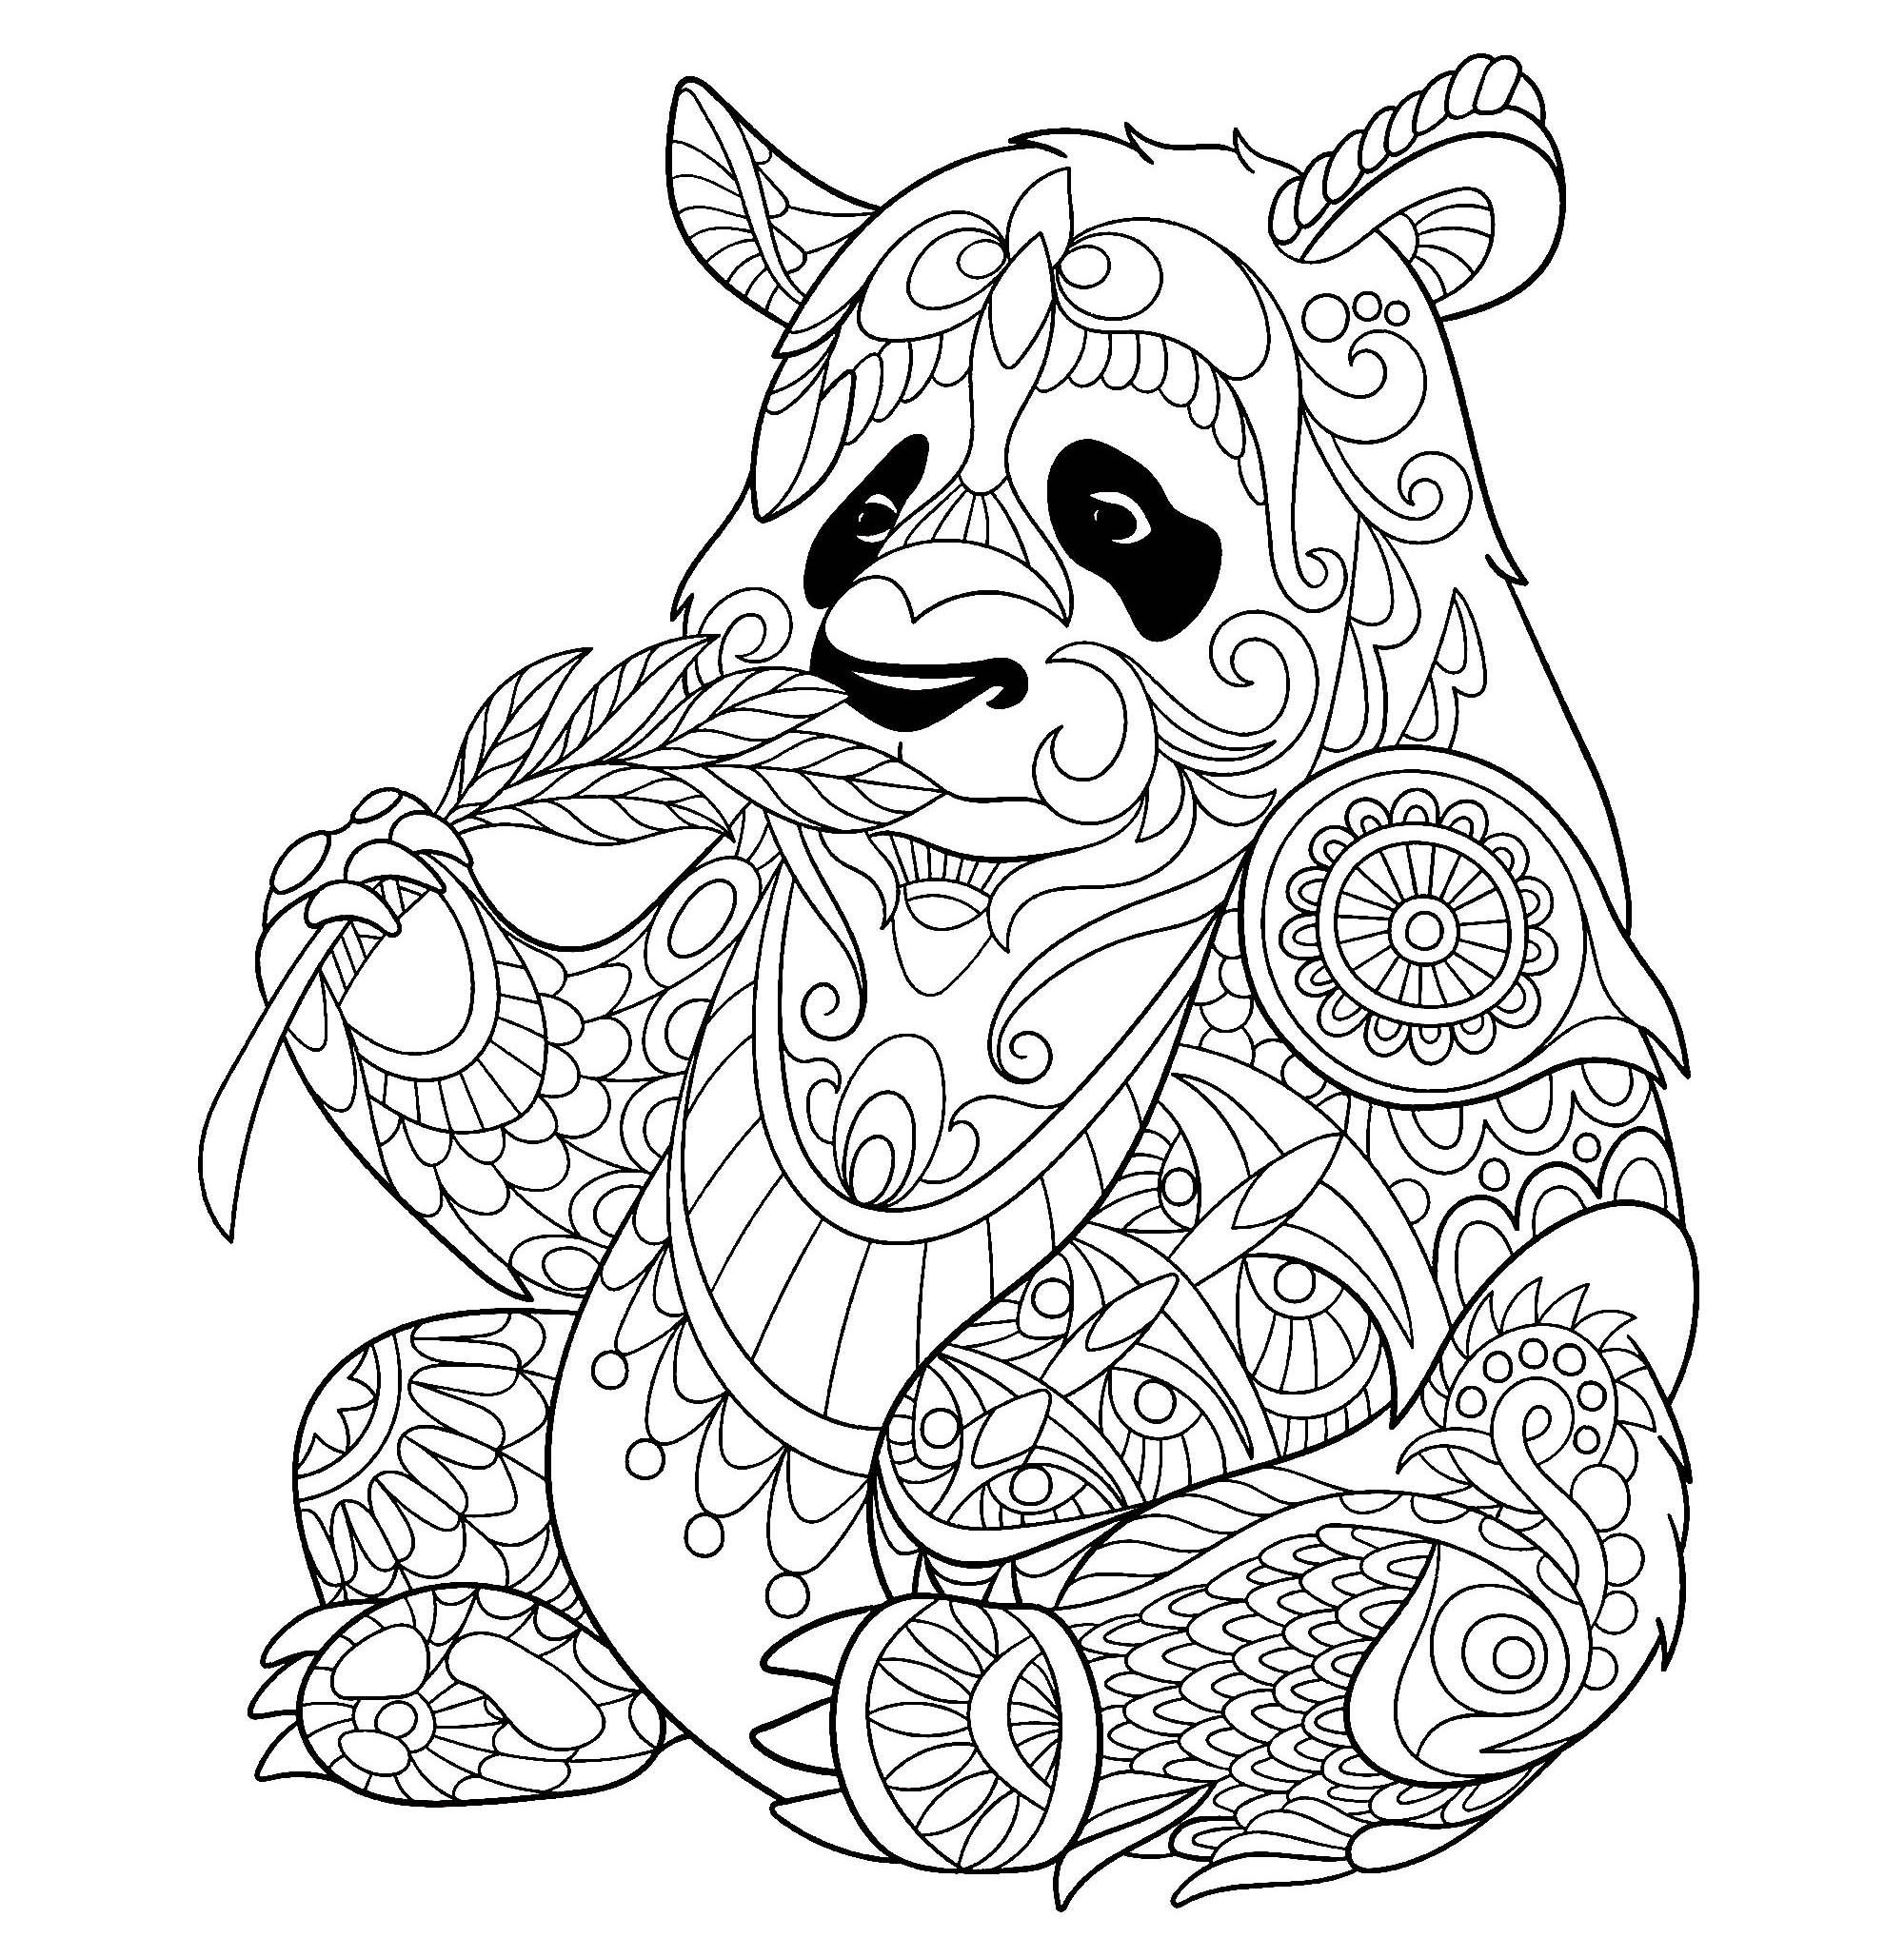 Panda Coloring Pages For Kids
 Pandas for kids Pandas Kids Coloring Pages